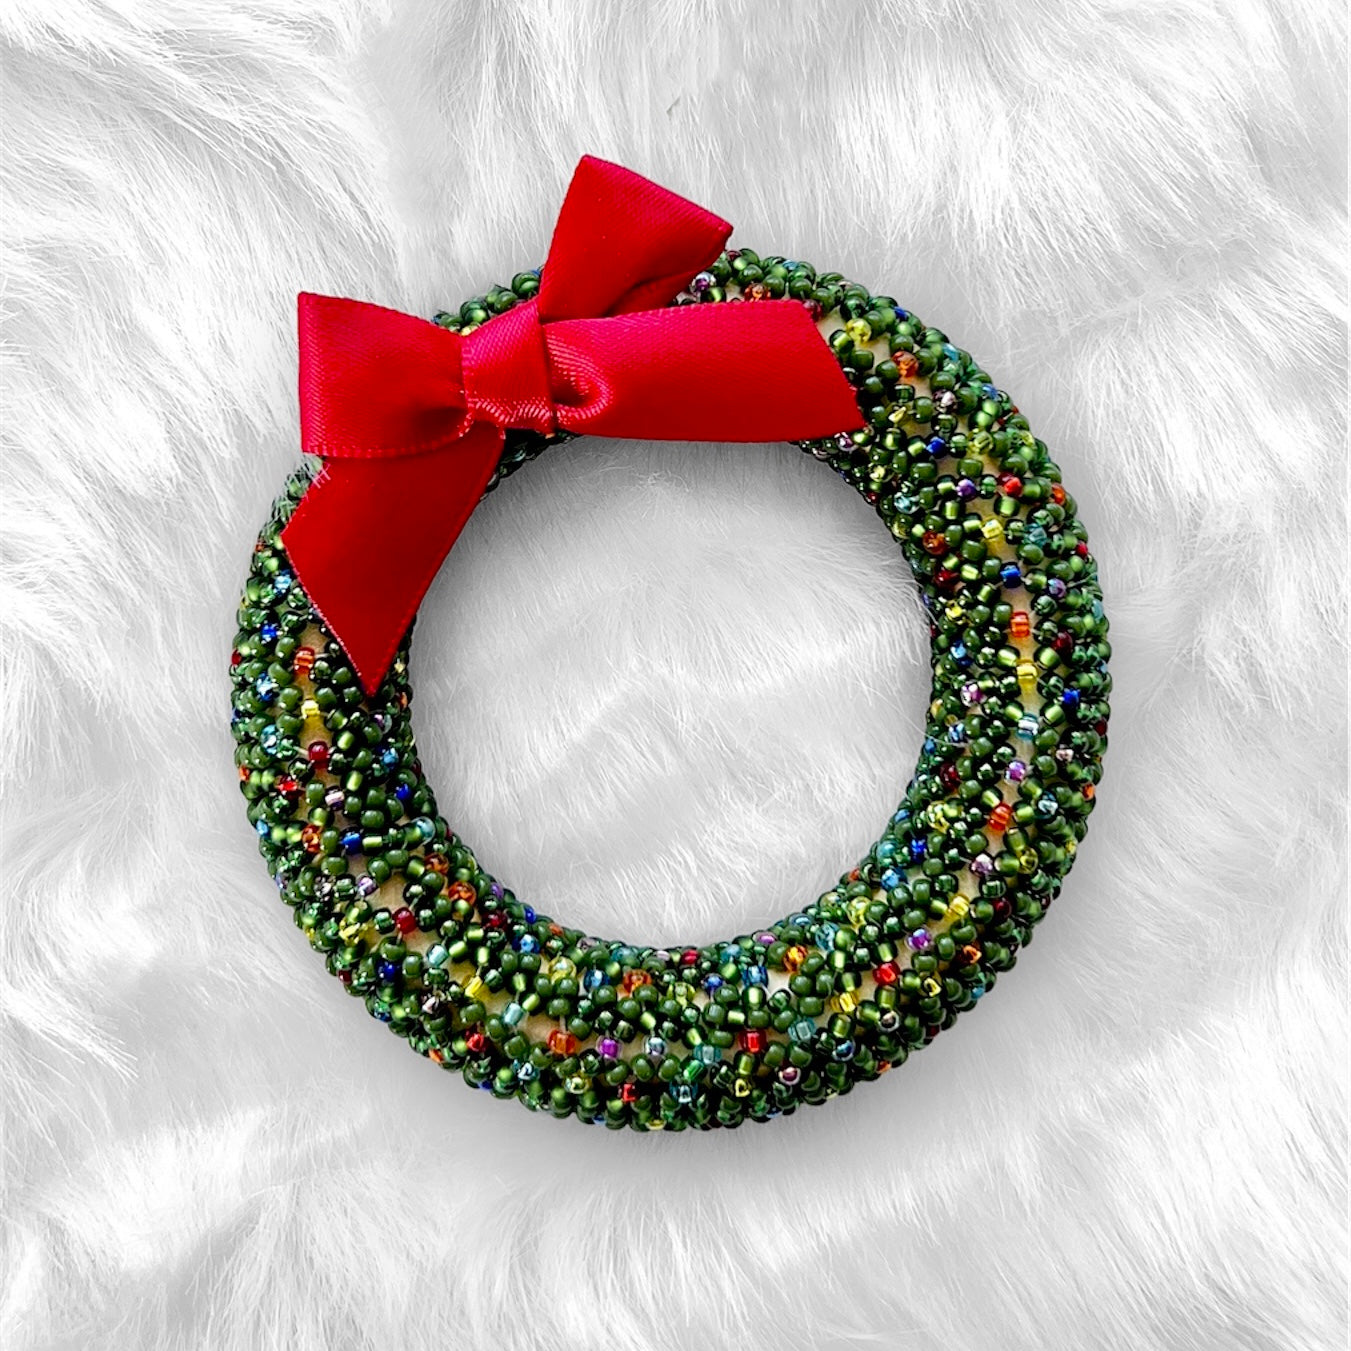 beaded christmas wreath ornament made with green seed beads and a red bow on a white faux fur backdrop